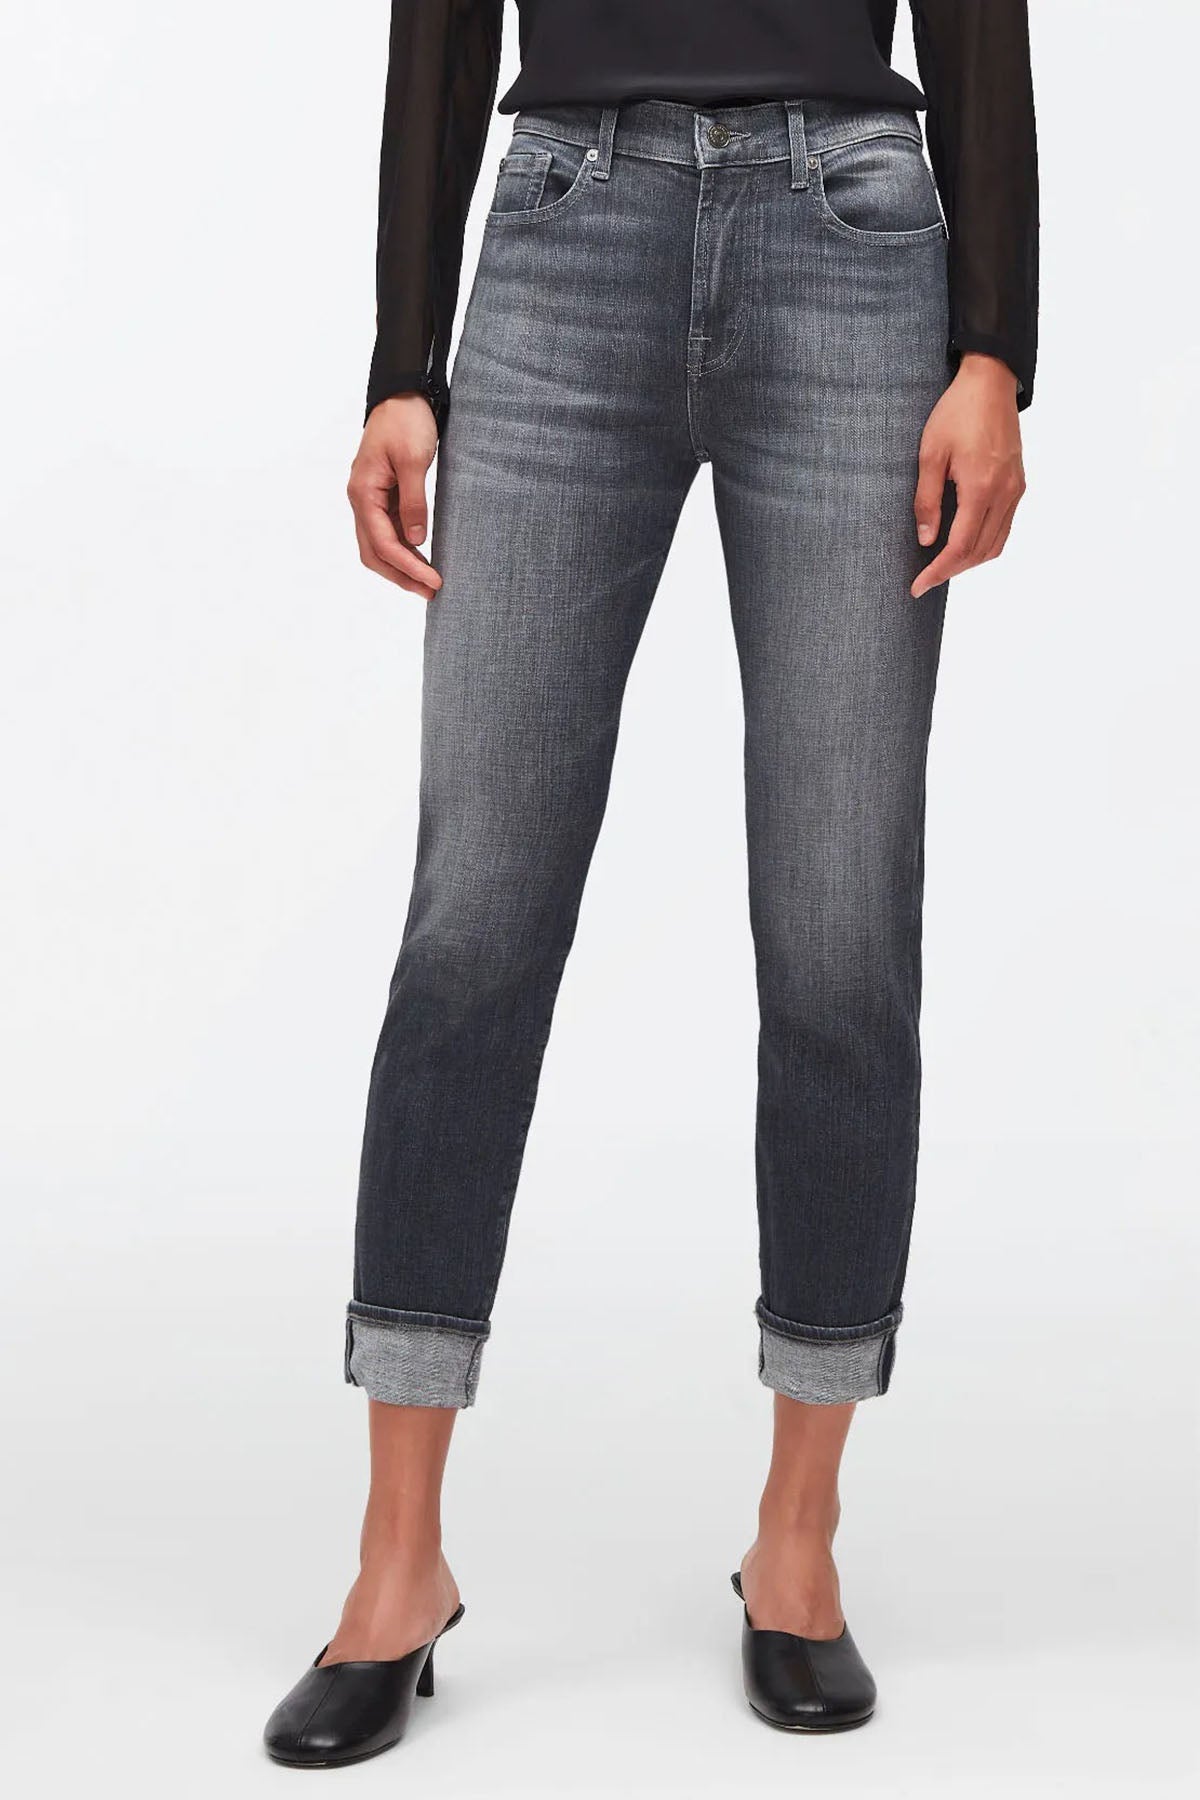 7 For All Mankind Relaxed Skinny Girlfriend Fit Jeans-Libas Trendy Fashion Store